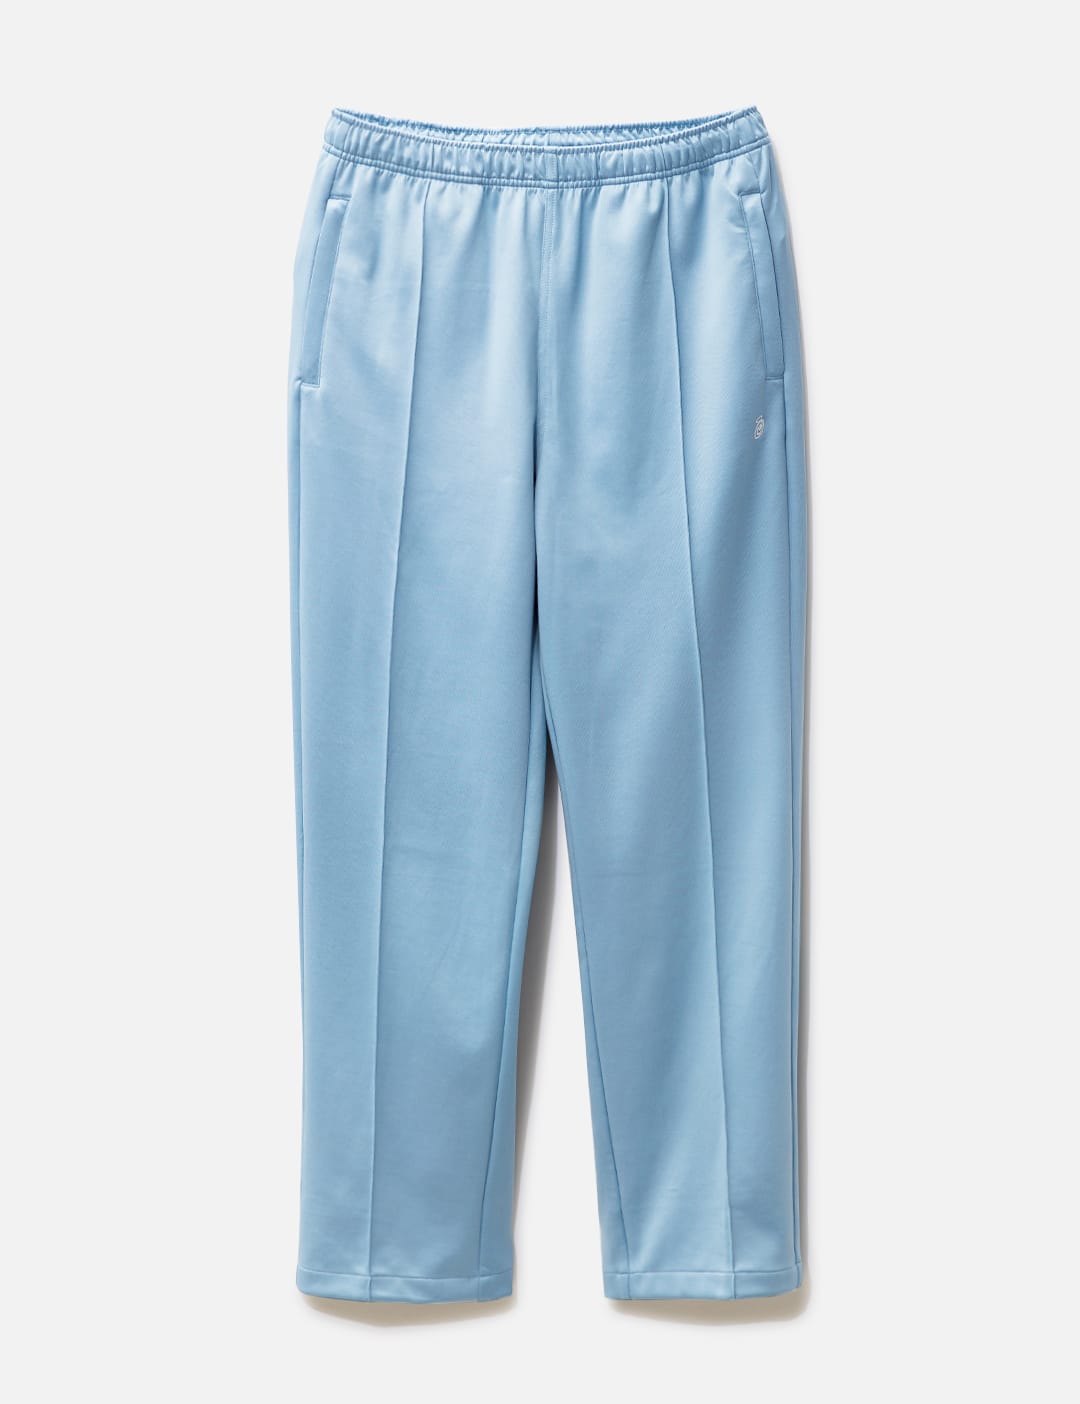 Stüssy - Poly Track Pants | HBX - Globally Curated Fashion and